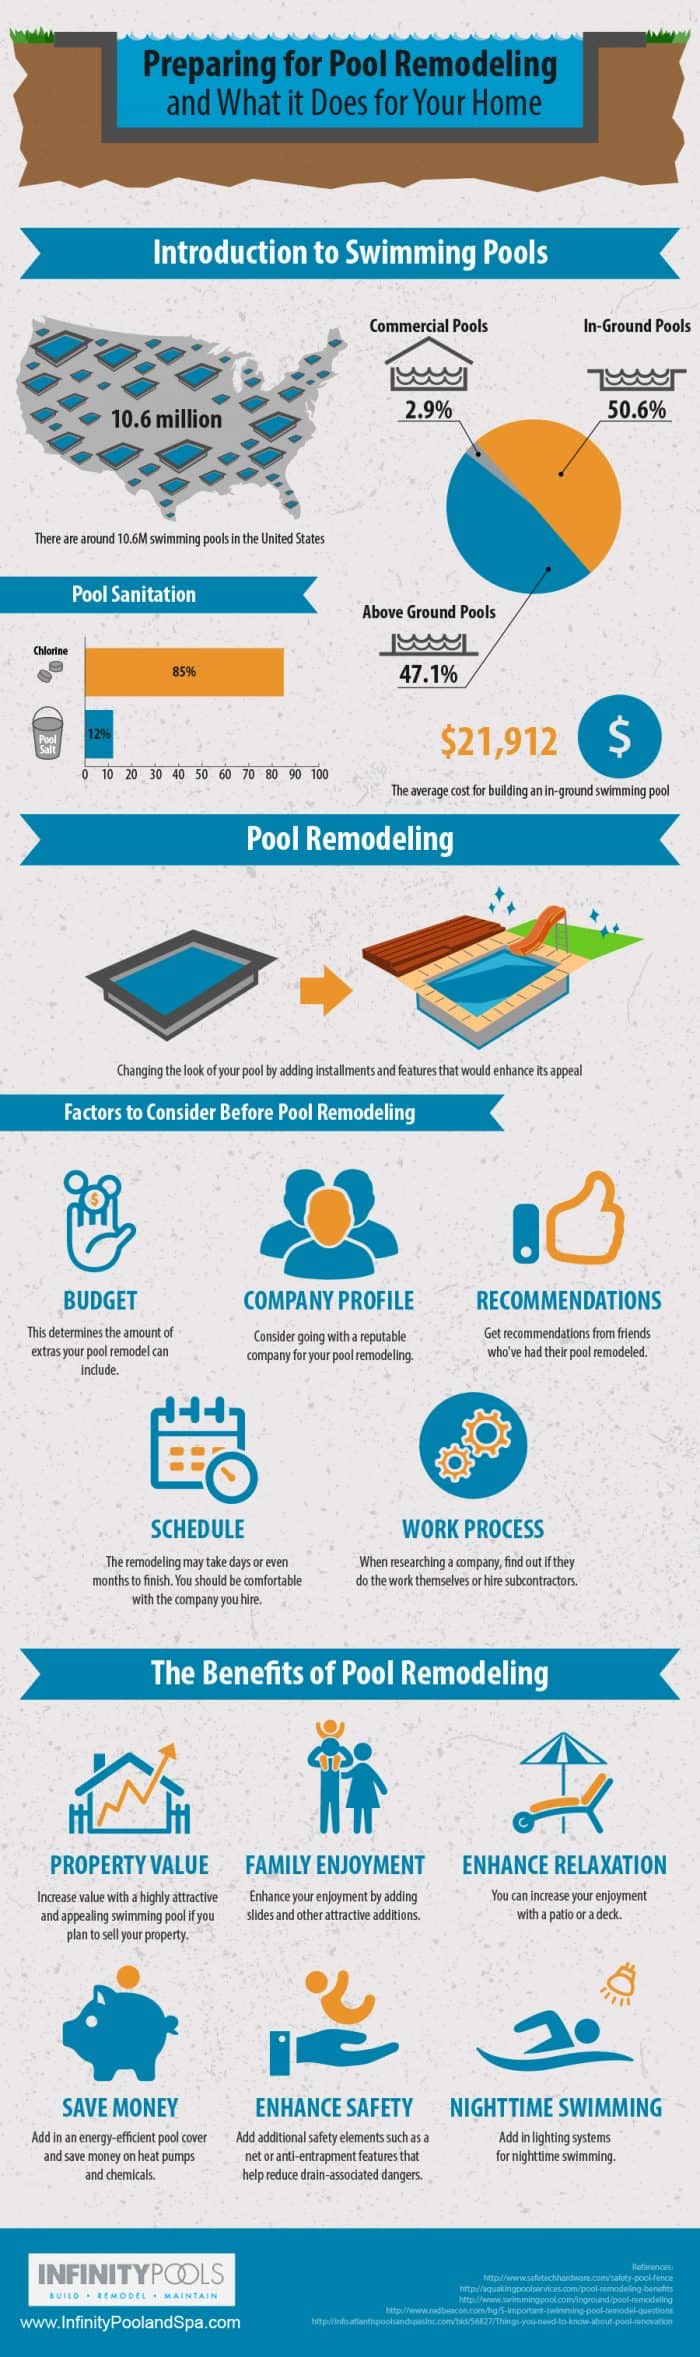 Pool remodeling infographic